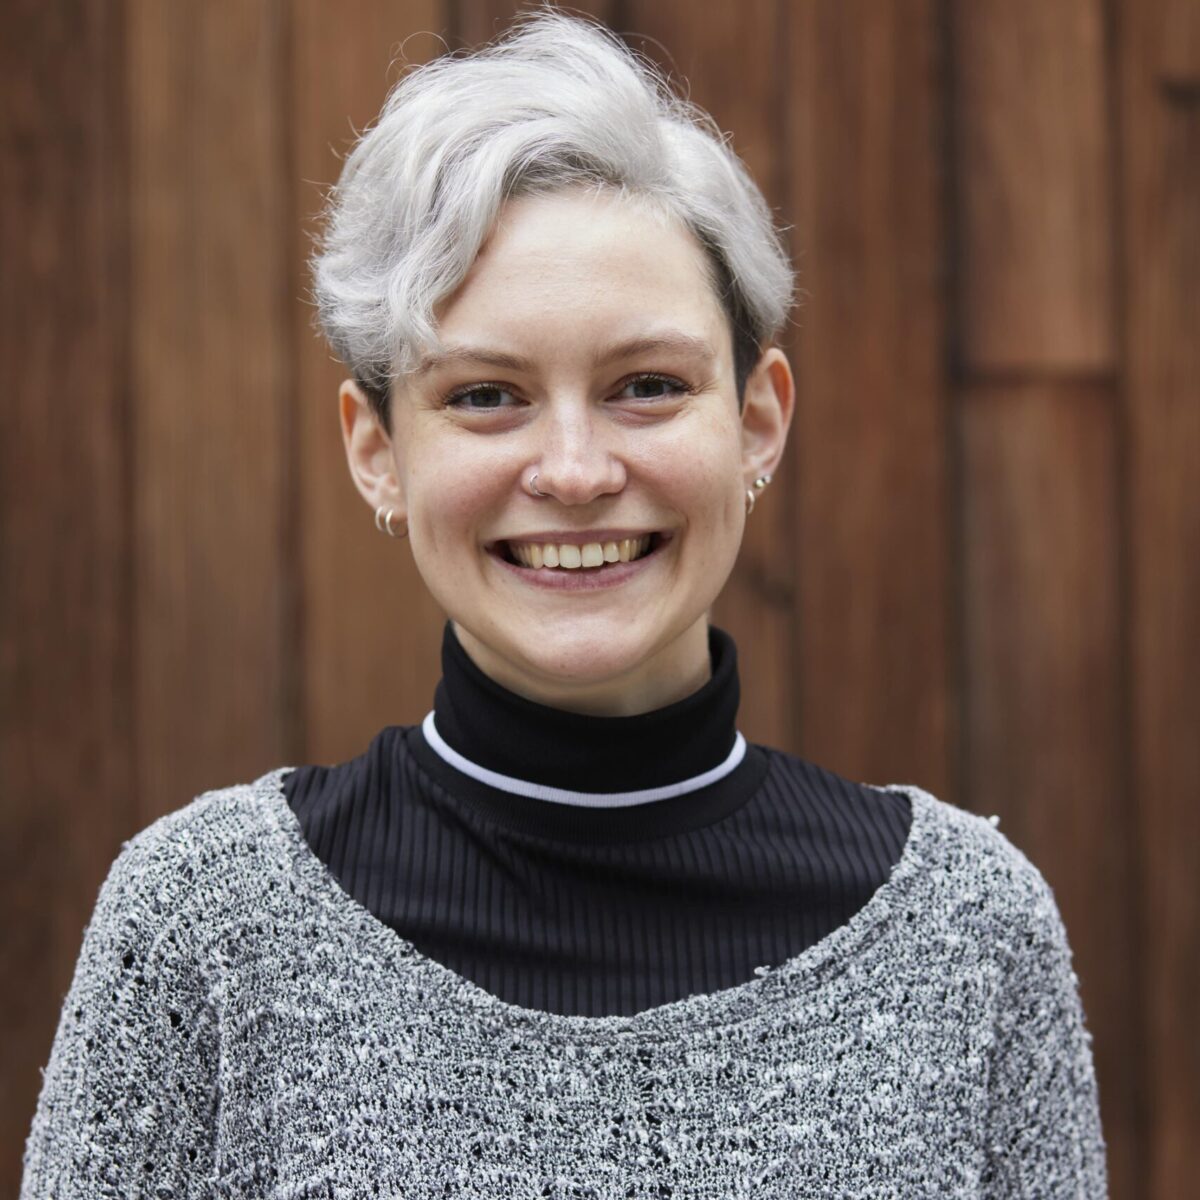 A profile shot of designer Anna Reid, Ana wears a black polo top underneath a grey cardigan and silver necklace. She smiles directly into the camera